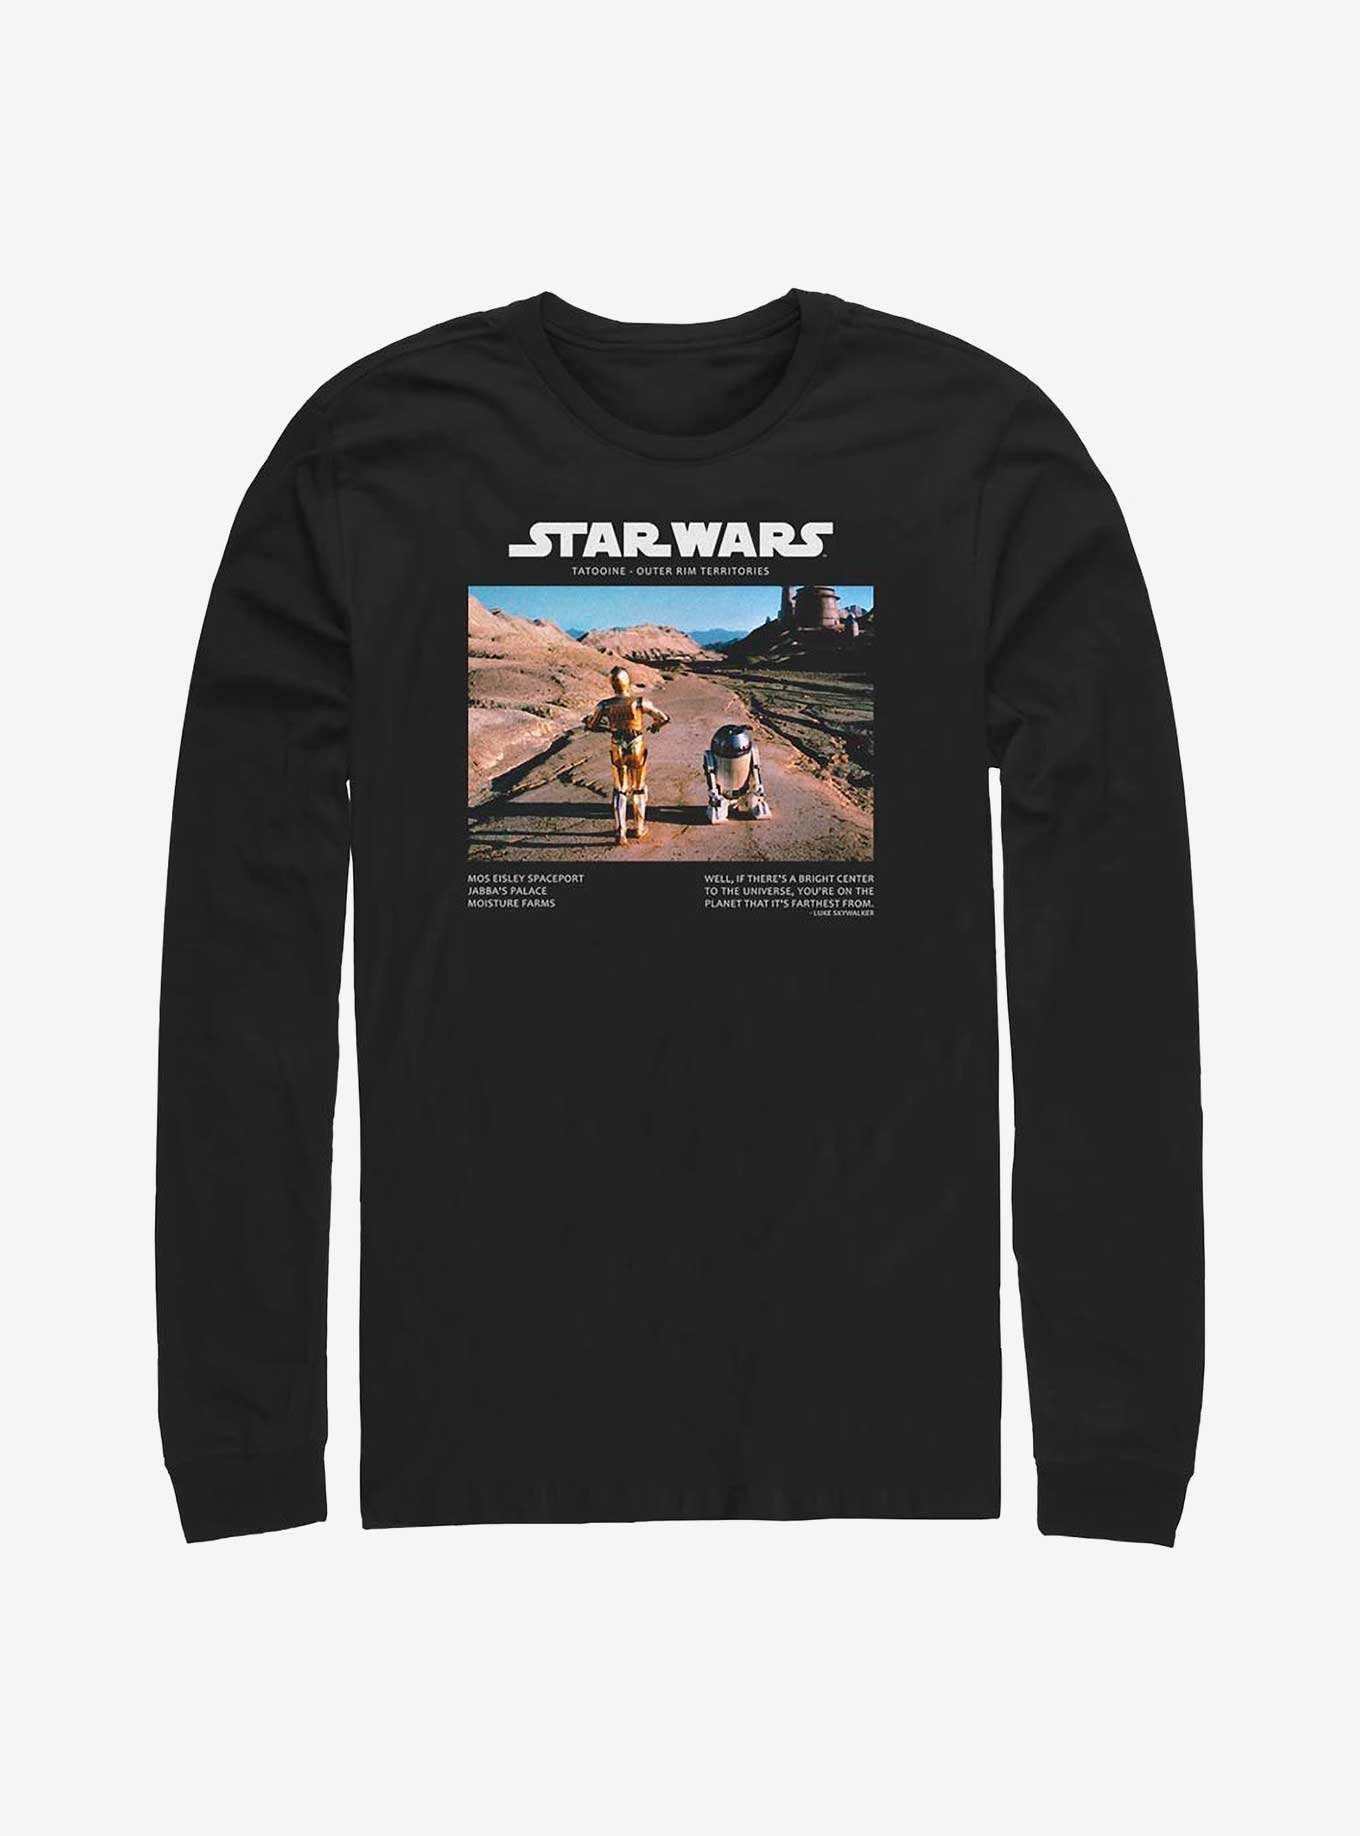 Star Wars Tatooine Travelers C-3PO and R2-D2 Long-Sleeve T-Shirt, , hi-res